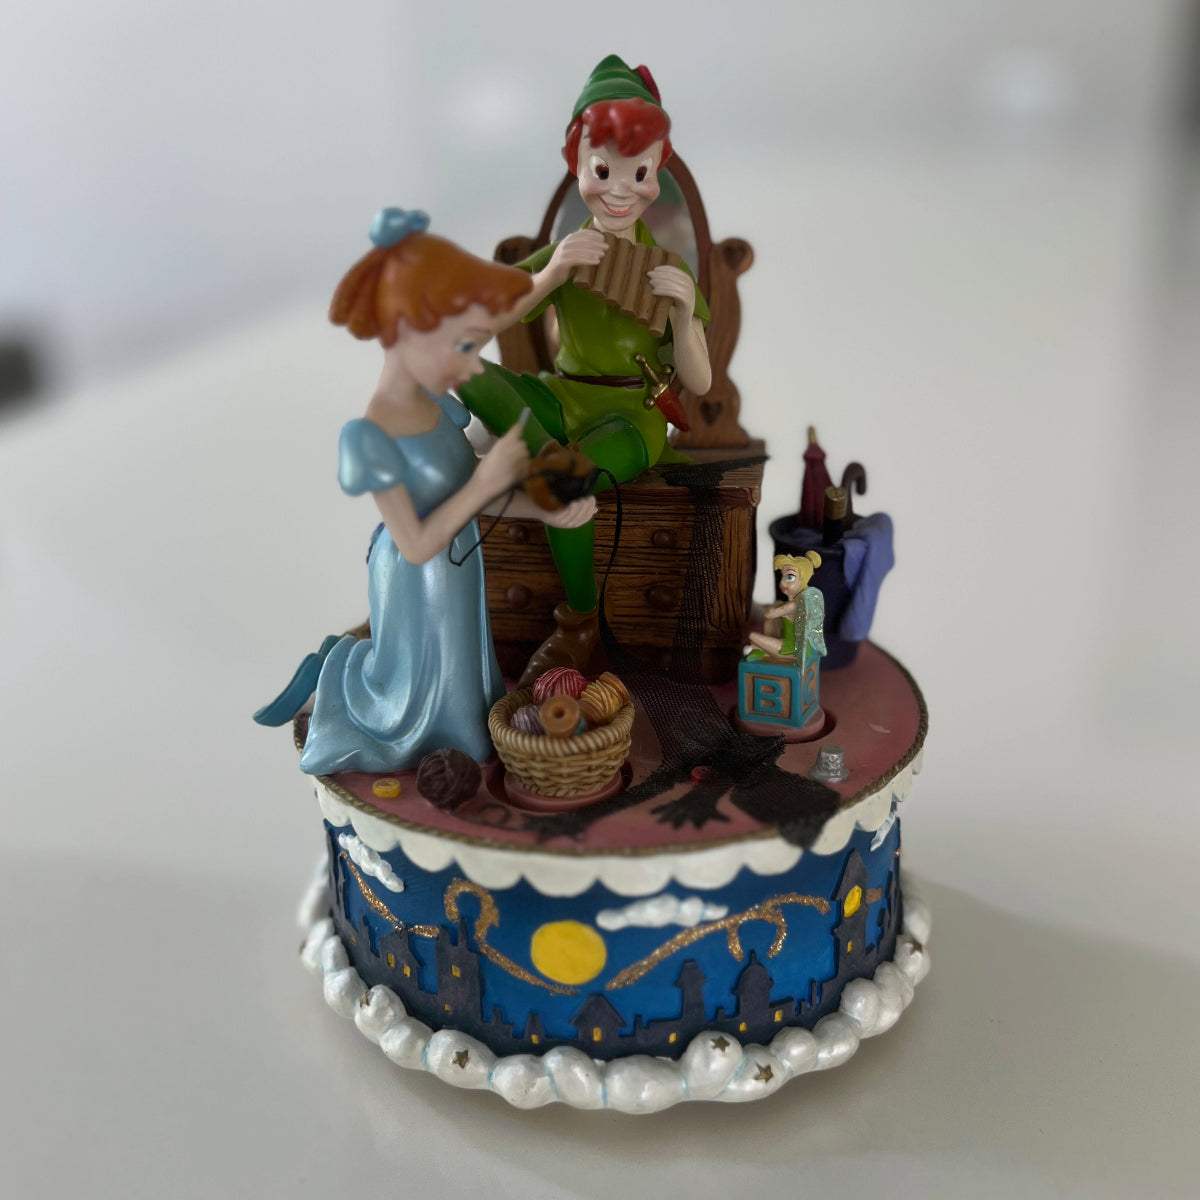 VTG Disney Peter Pan Shadow with Wendy and Tinker Bell Bell musical box